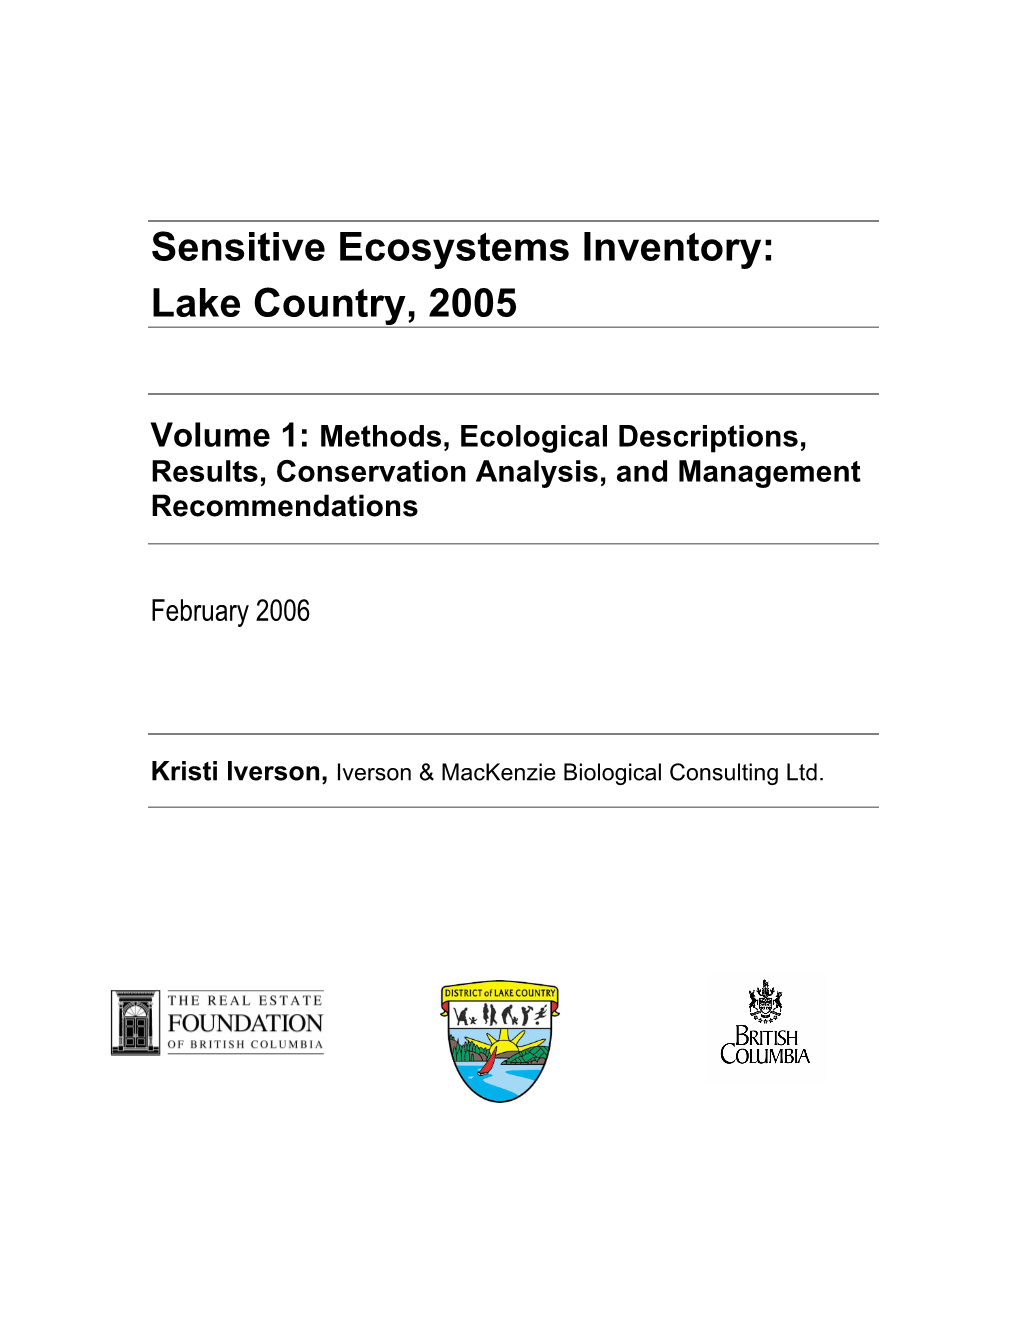 Sensitive Ecosystems Inventory: Lake Country, 2005